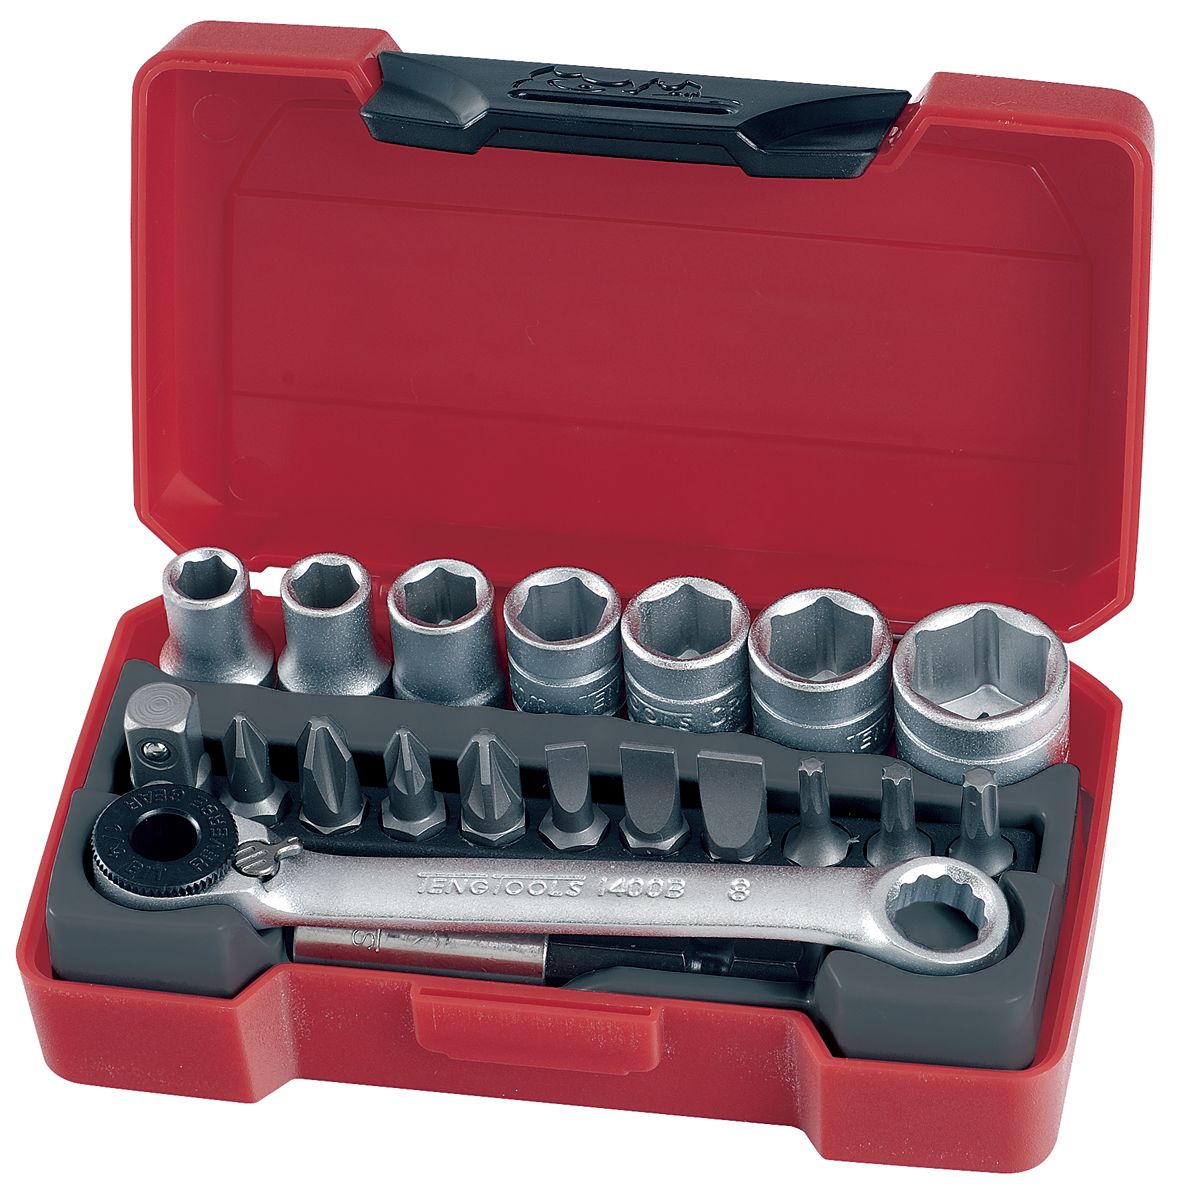 Teng Tools T1420 20 Piece 1/4" Drive Socket and bit in handy pocket storage caseSet